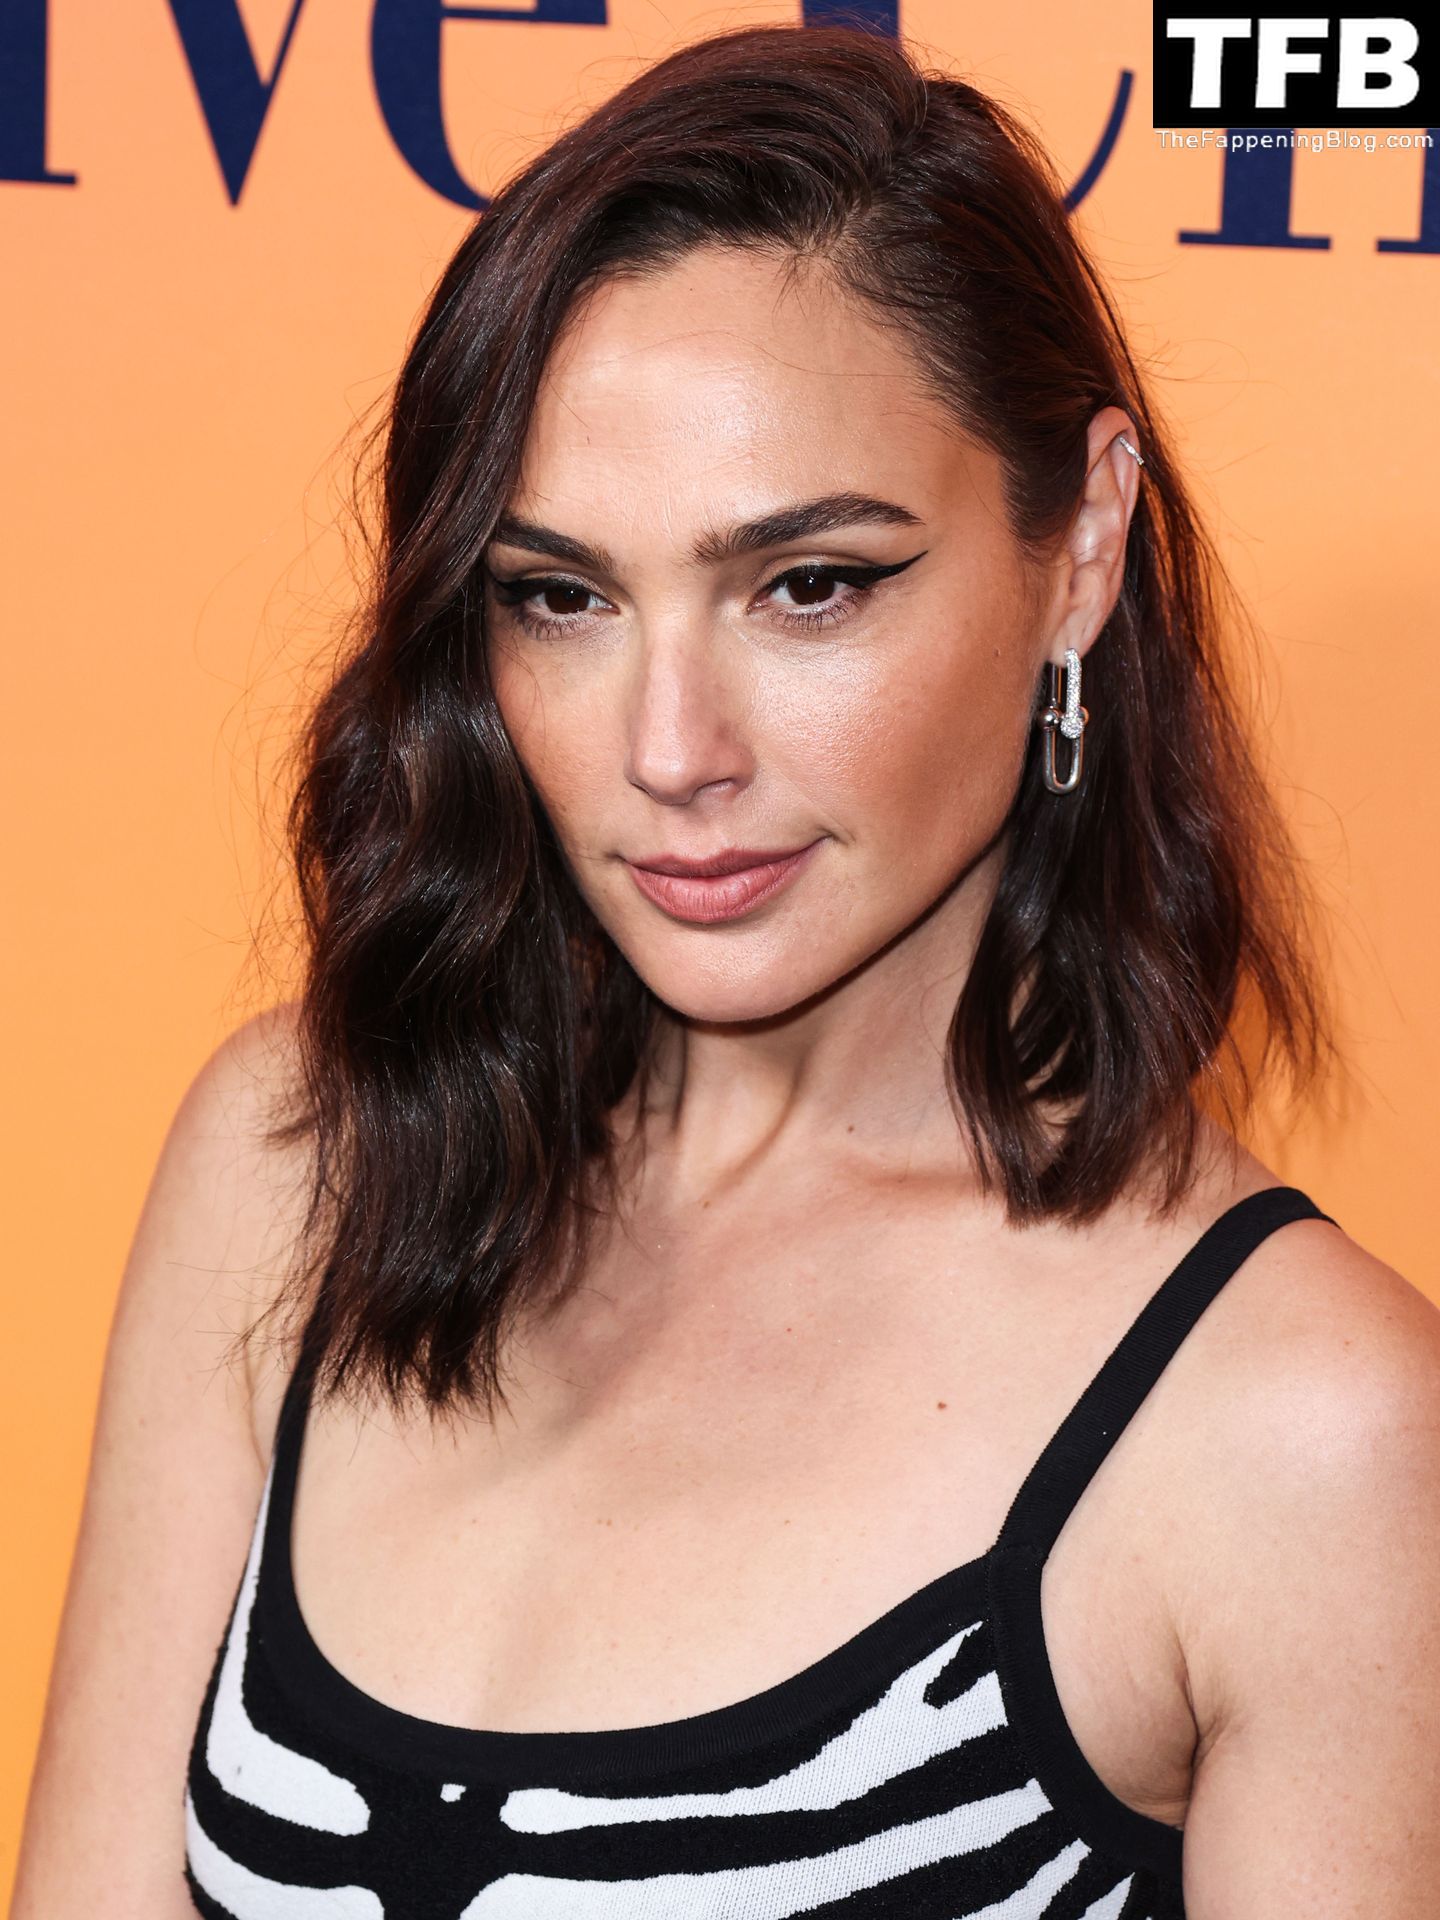 Gal Gadot Sexy 68 thefappeningblog.com  - Gal Gadot Displays Her Gorgeous Figure at the Traveling Exhibition “Solaire Culture” in Beverly Hills (77 Photos)